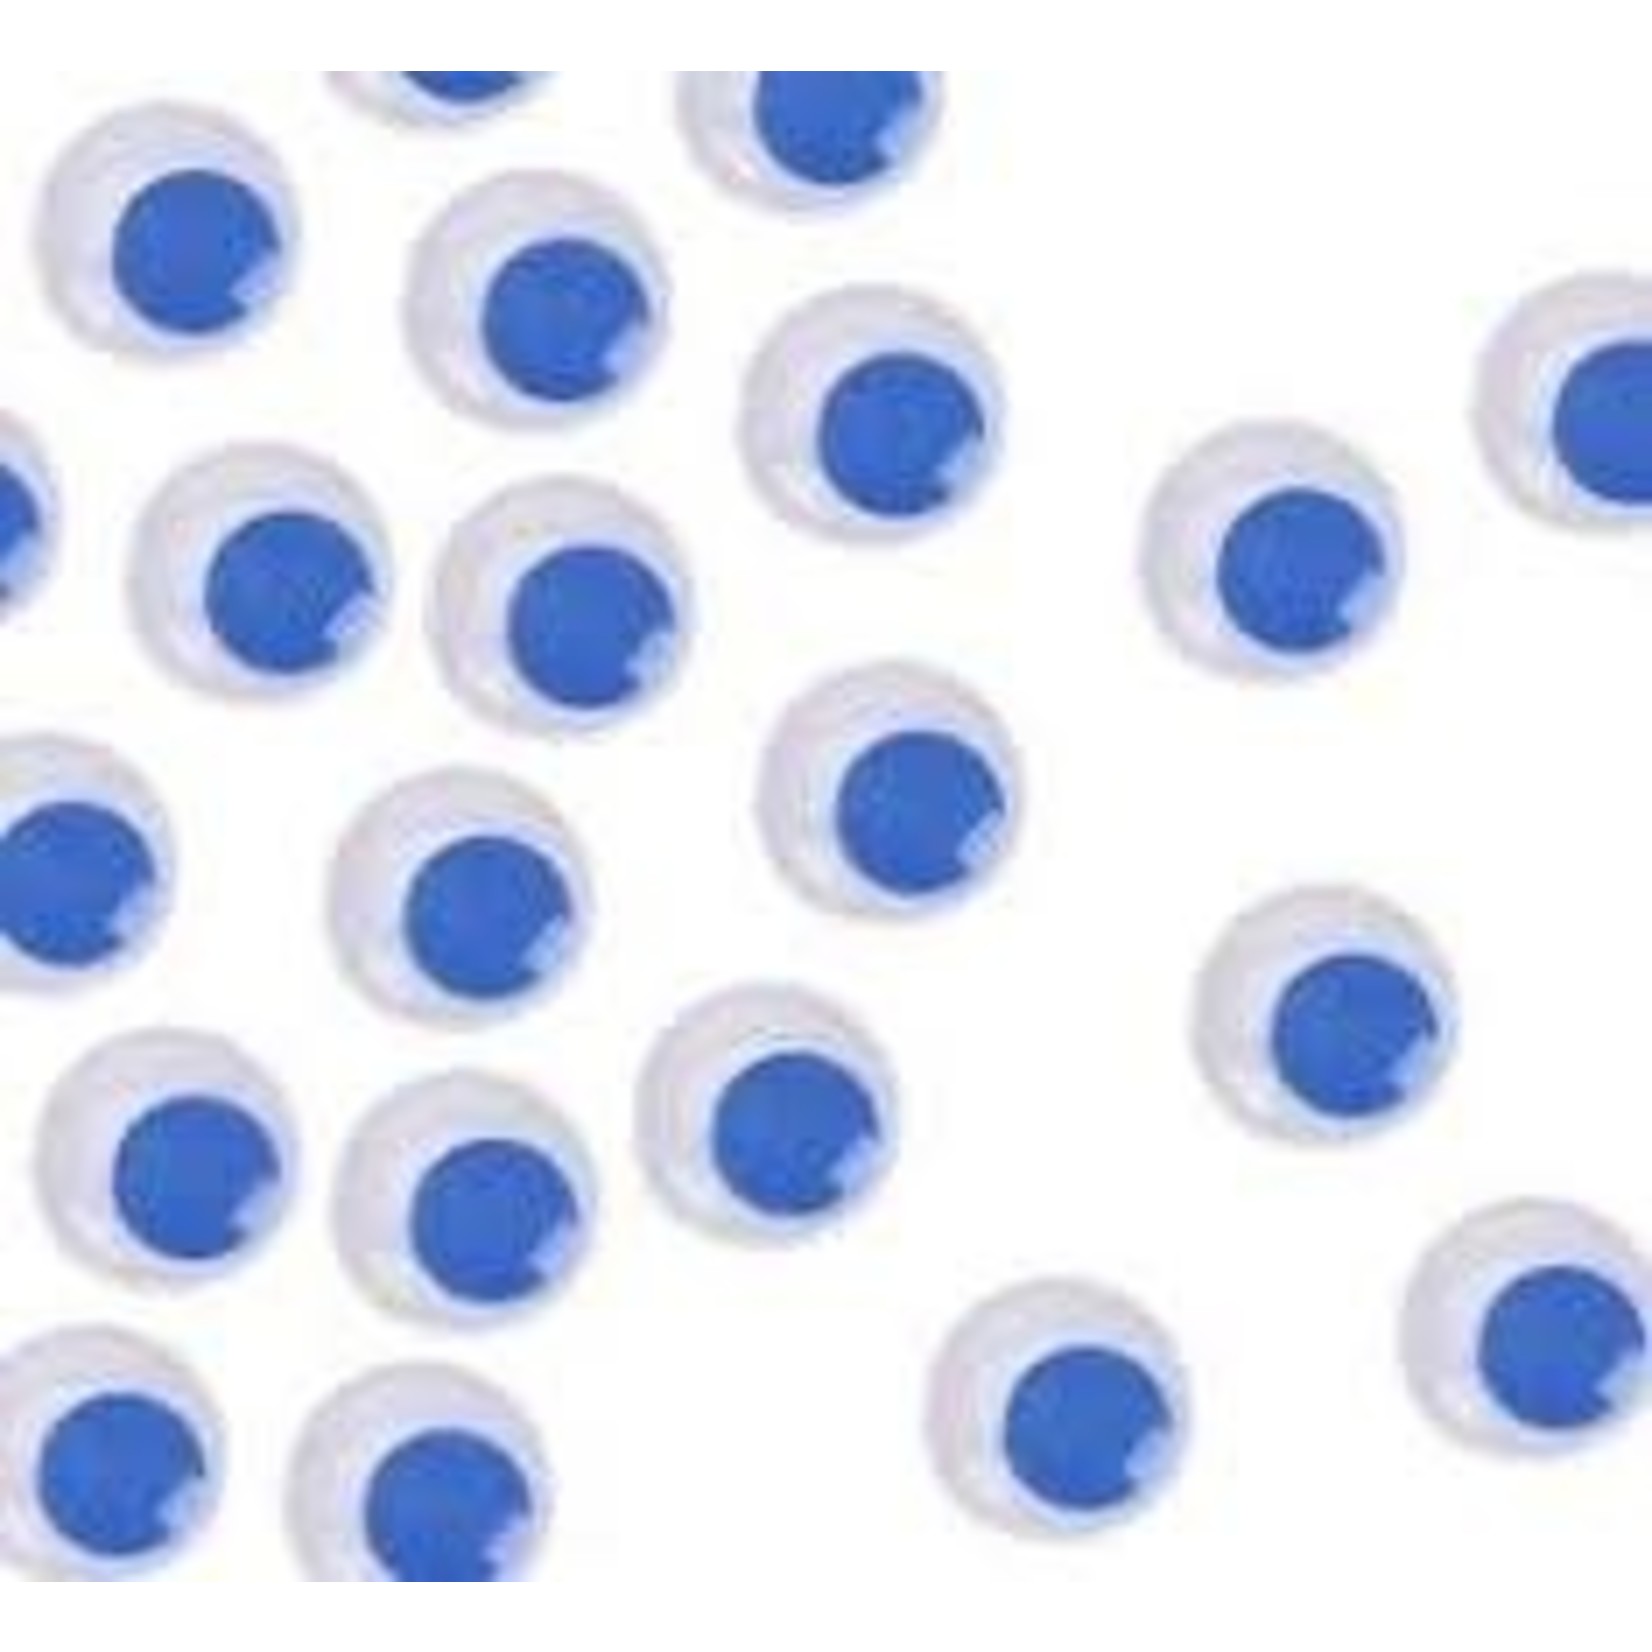 ROUND PASTE-ON WIGGLY EYES - 5MM - 28PK - BLUE